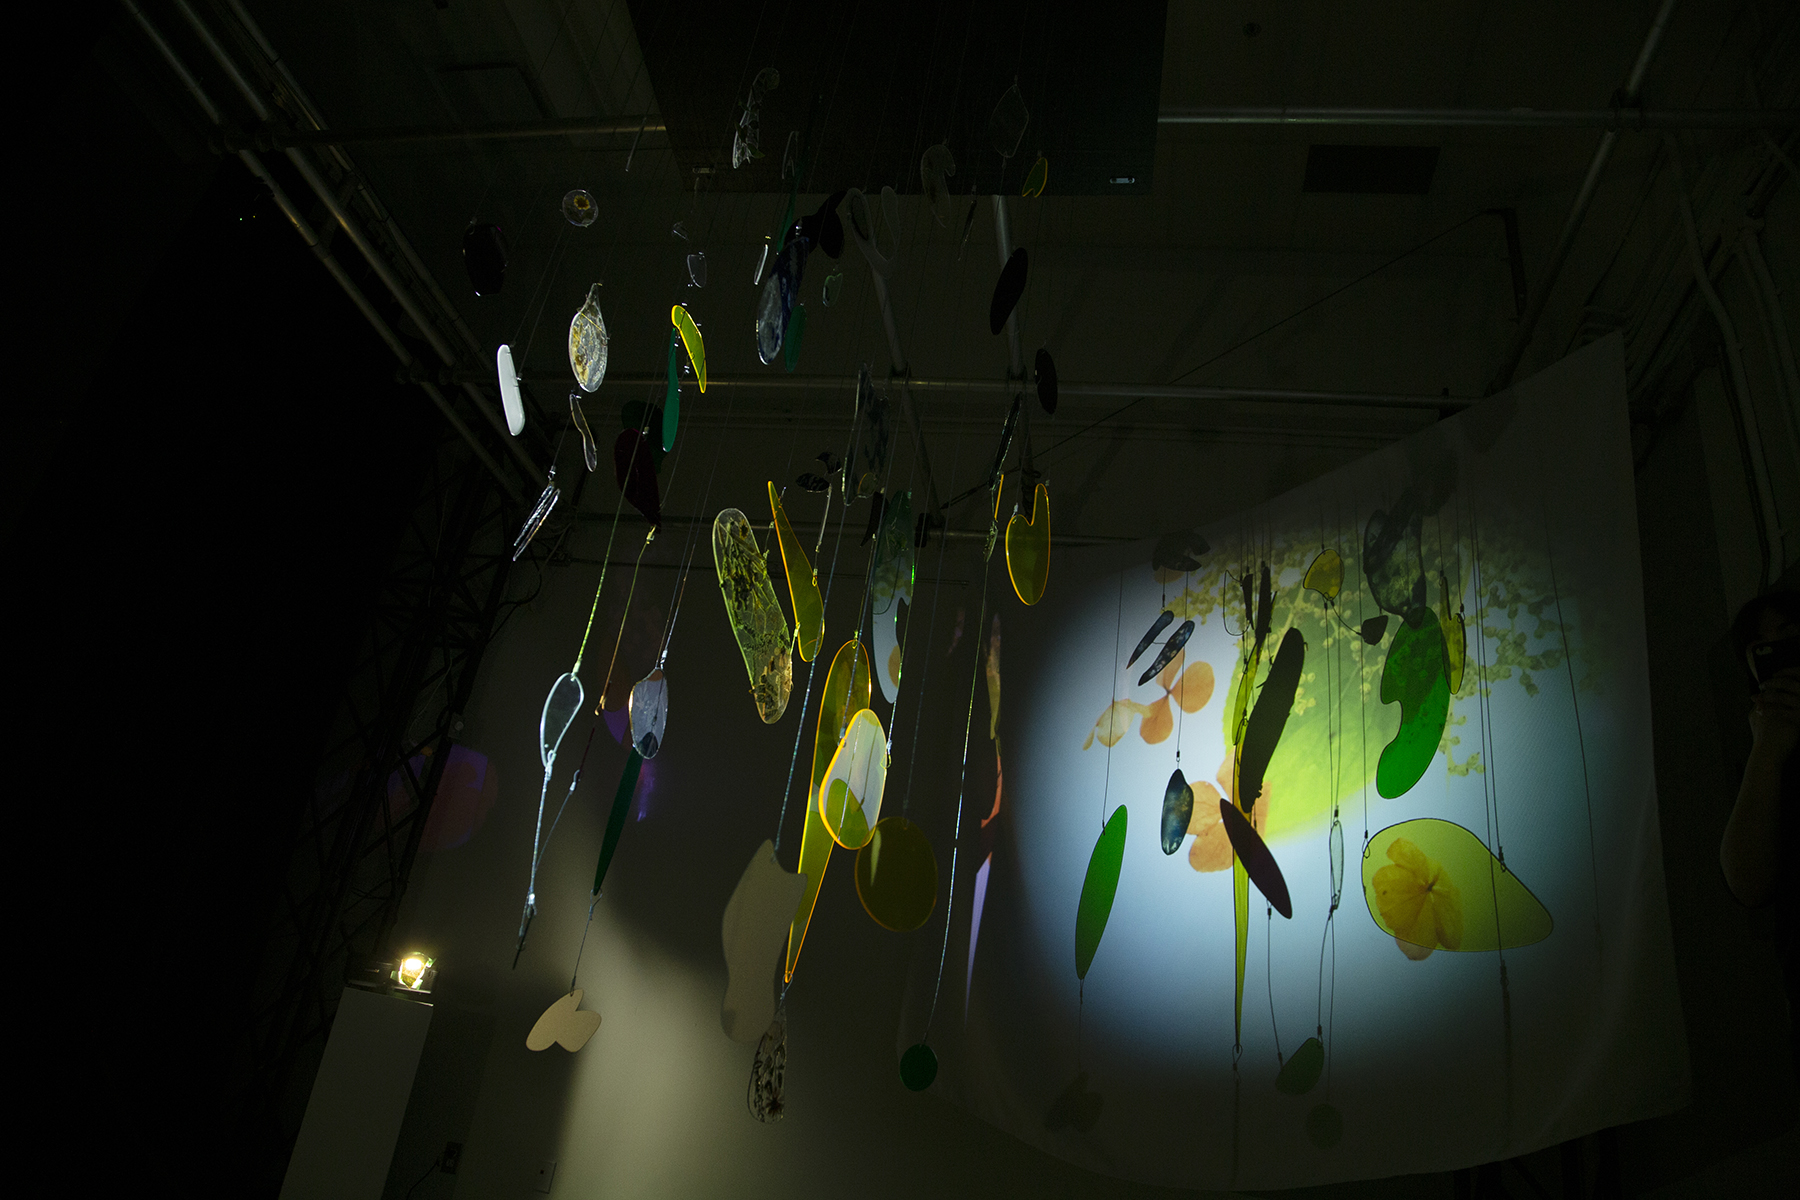 Installation photo depicting colourful shadows cast by the sculpture